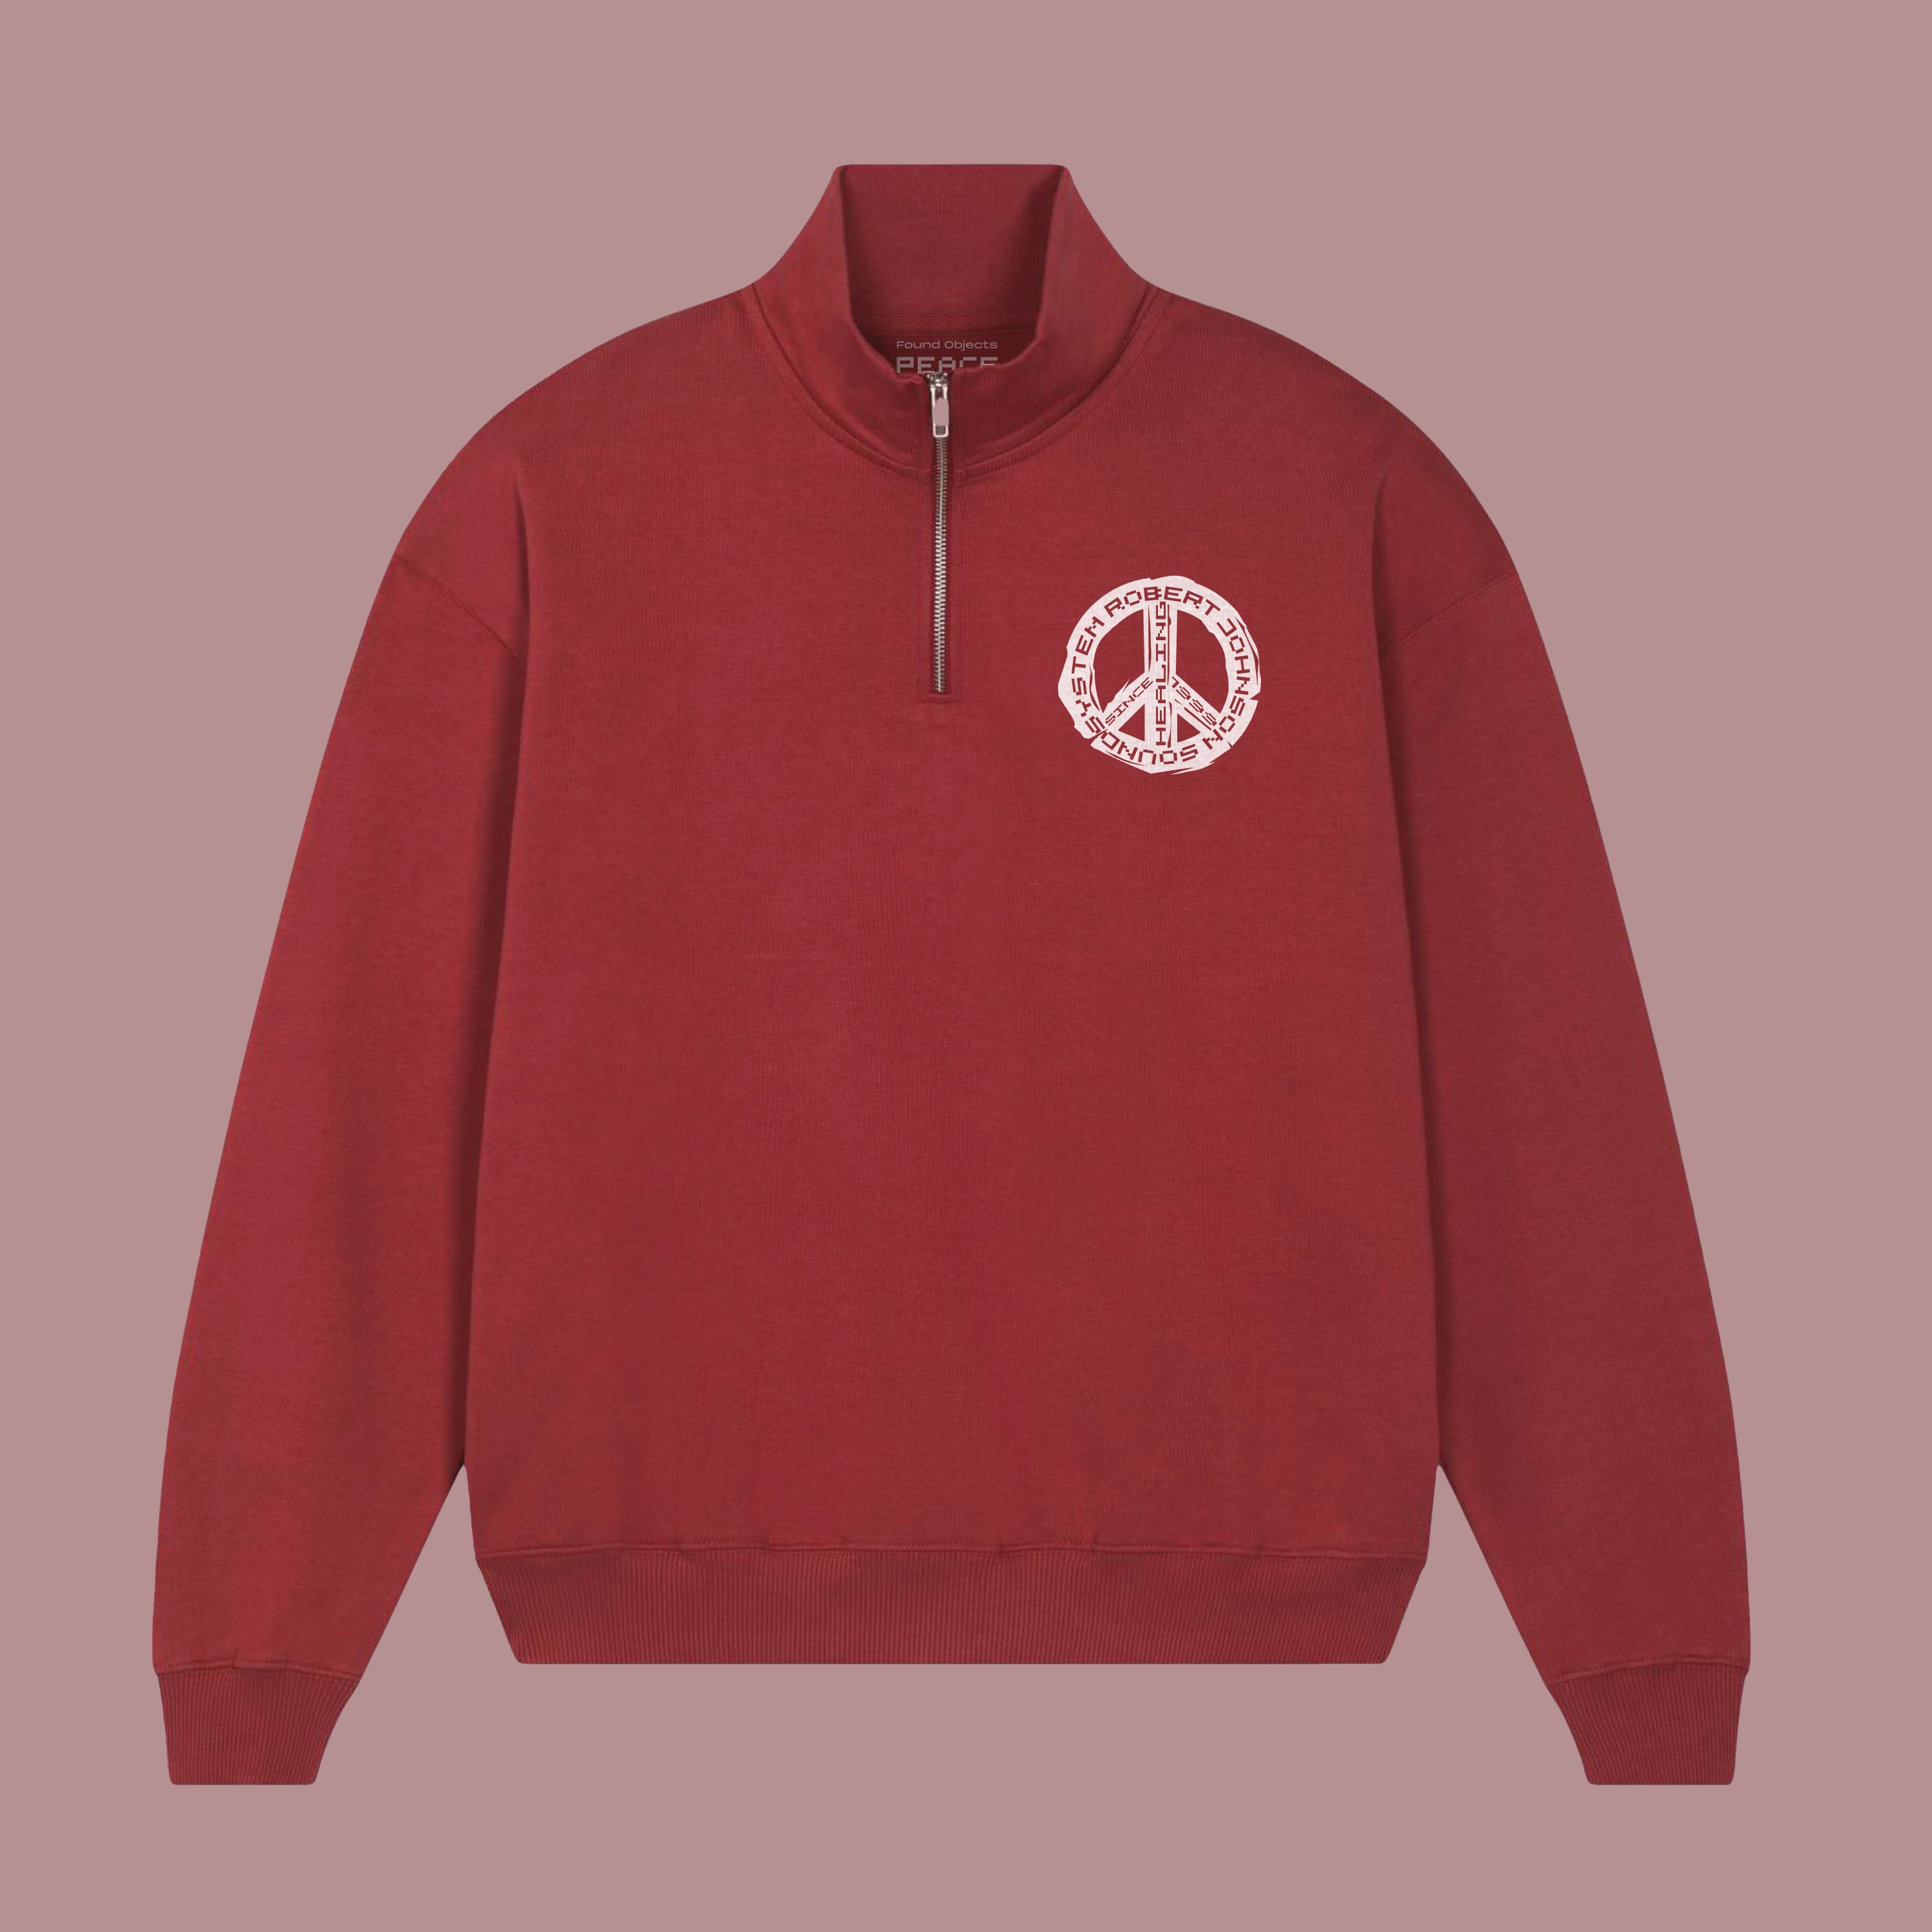 "Found Objects: Peace by Gerald Holtom!" - ZIP SWEATSHIRT - RED